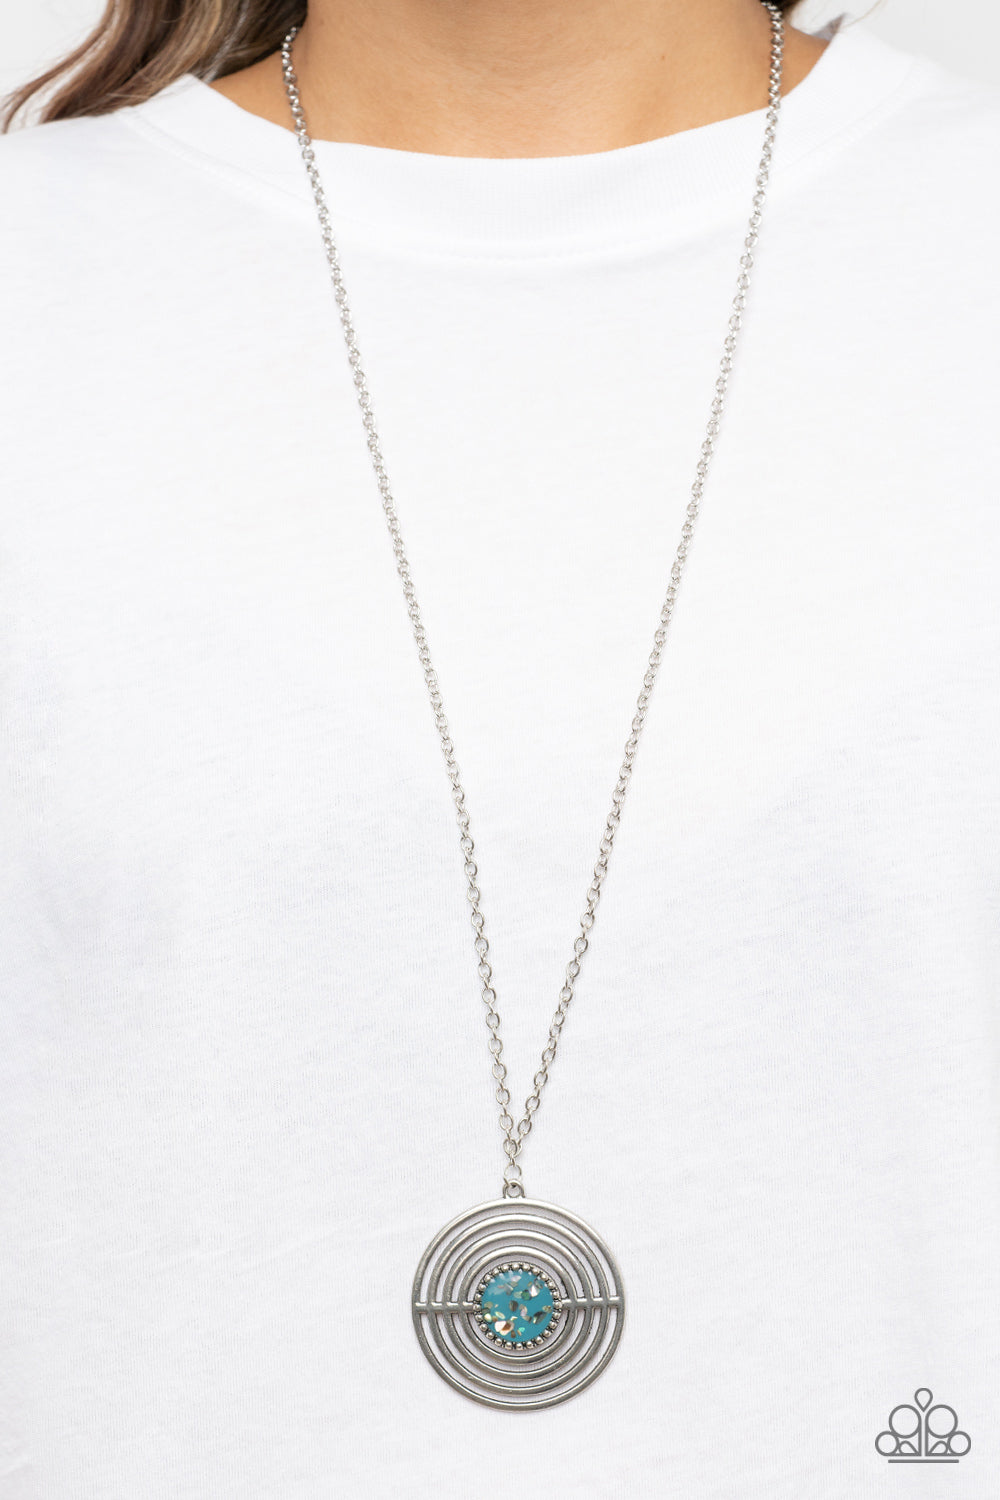 Paparazzi Necklaces - Targeted Tranquility - Blue